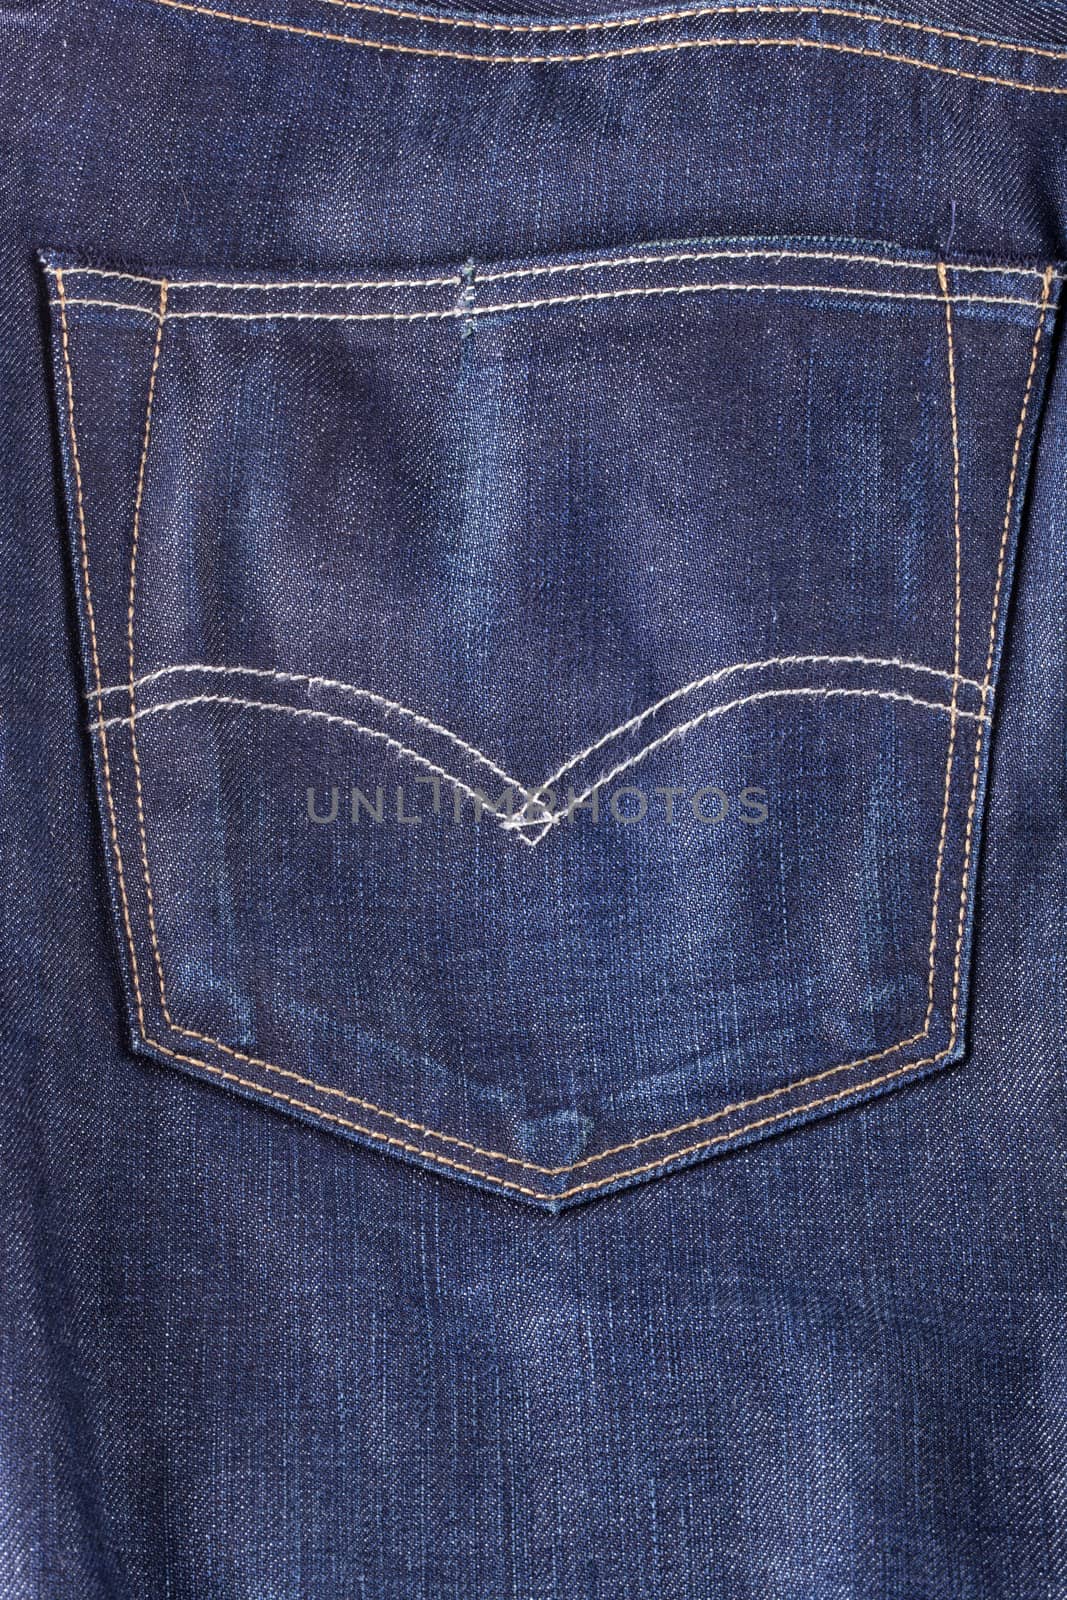 View of a back pocket of jeans trousers